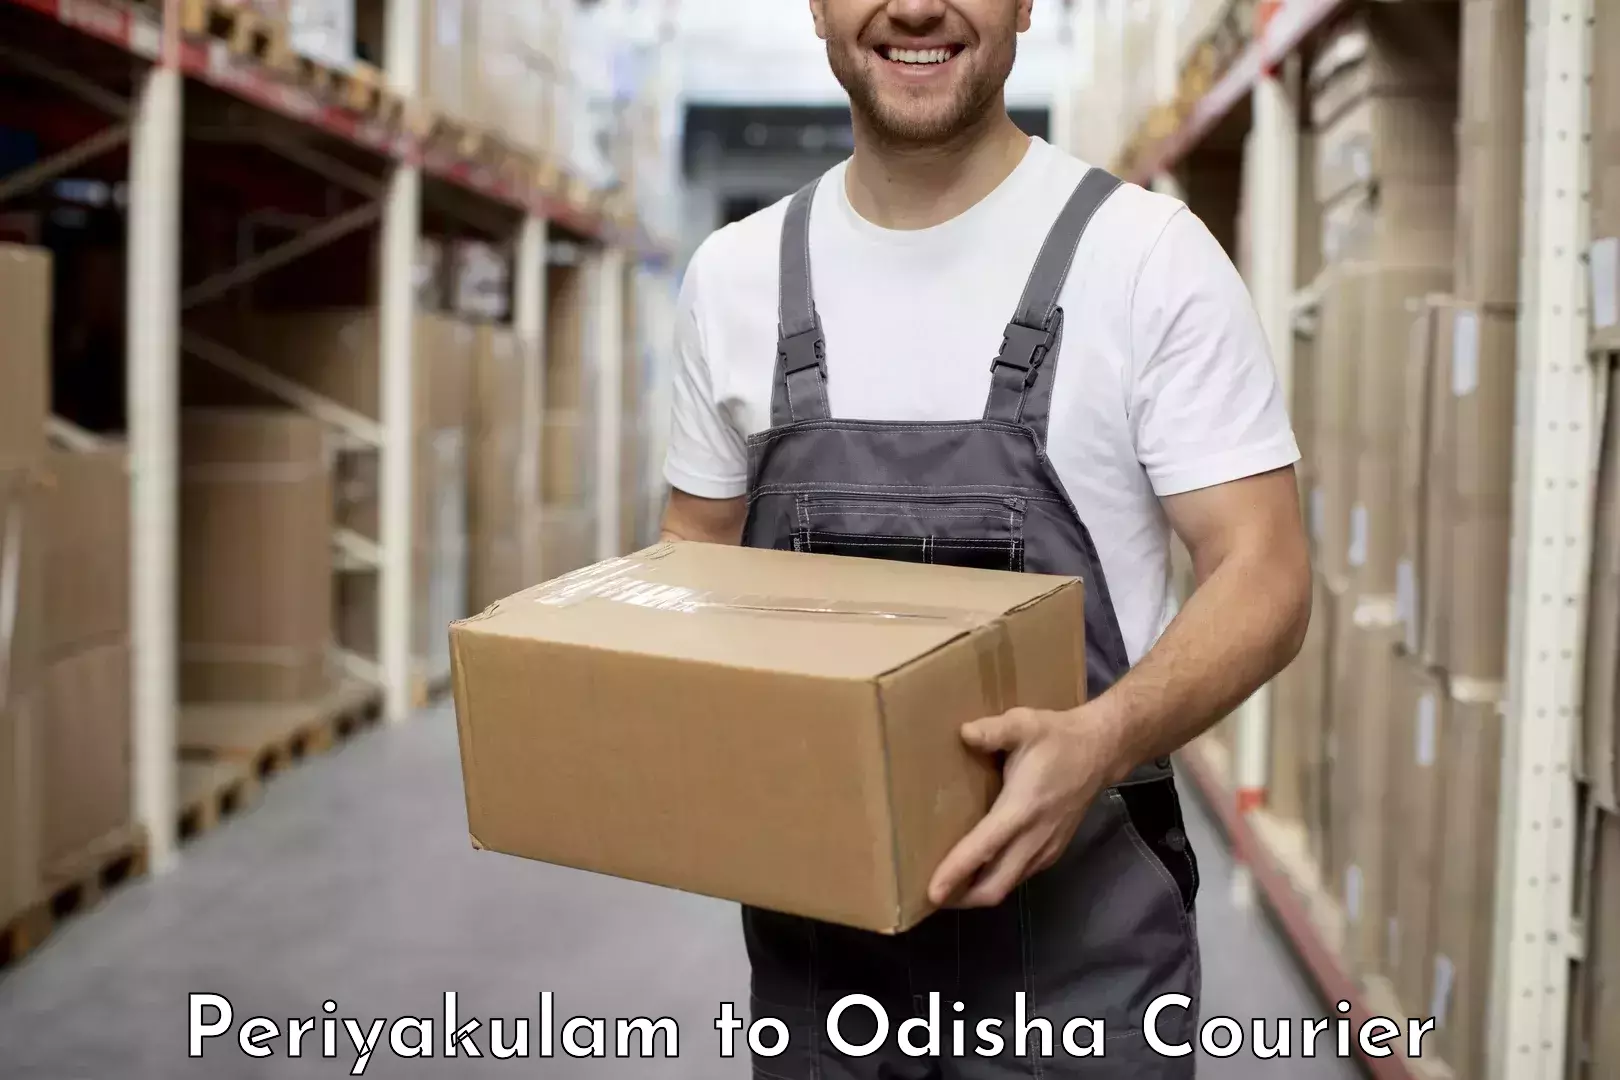 Professional courier handling Periyakulam to Bheden